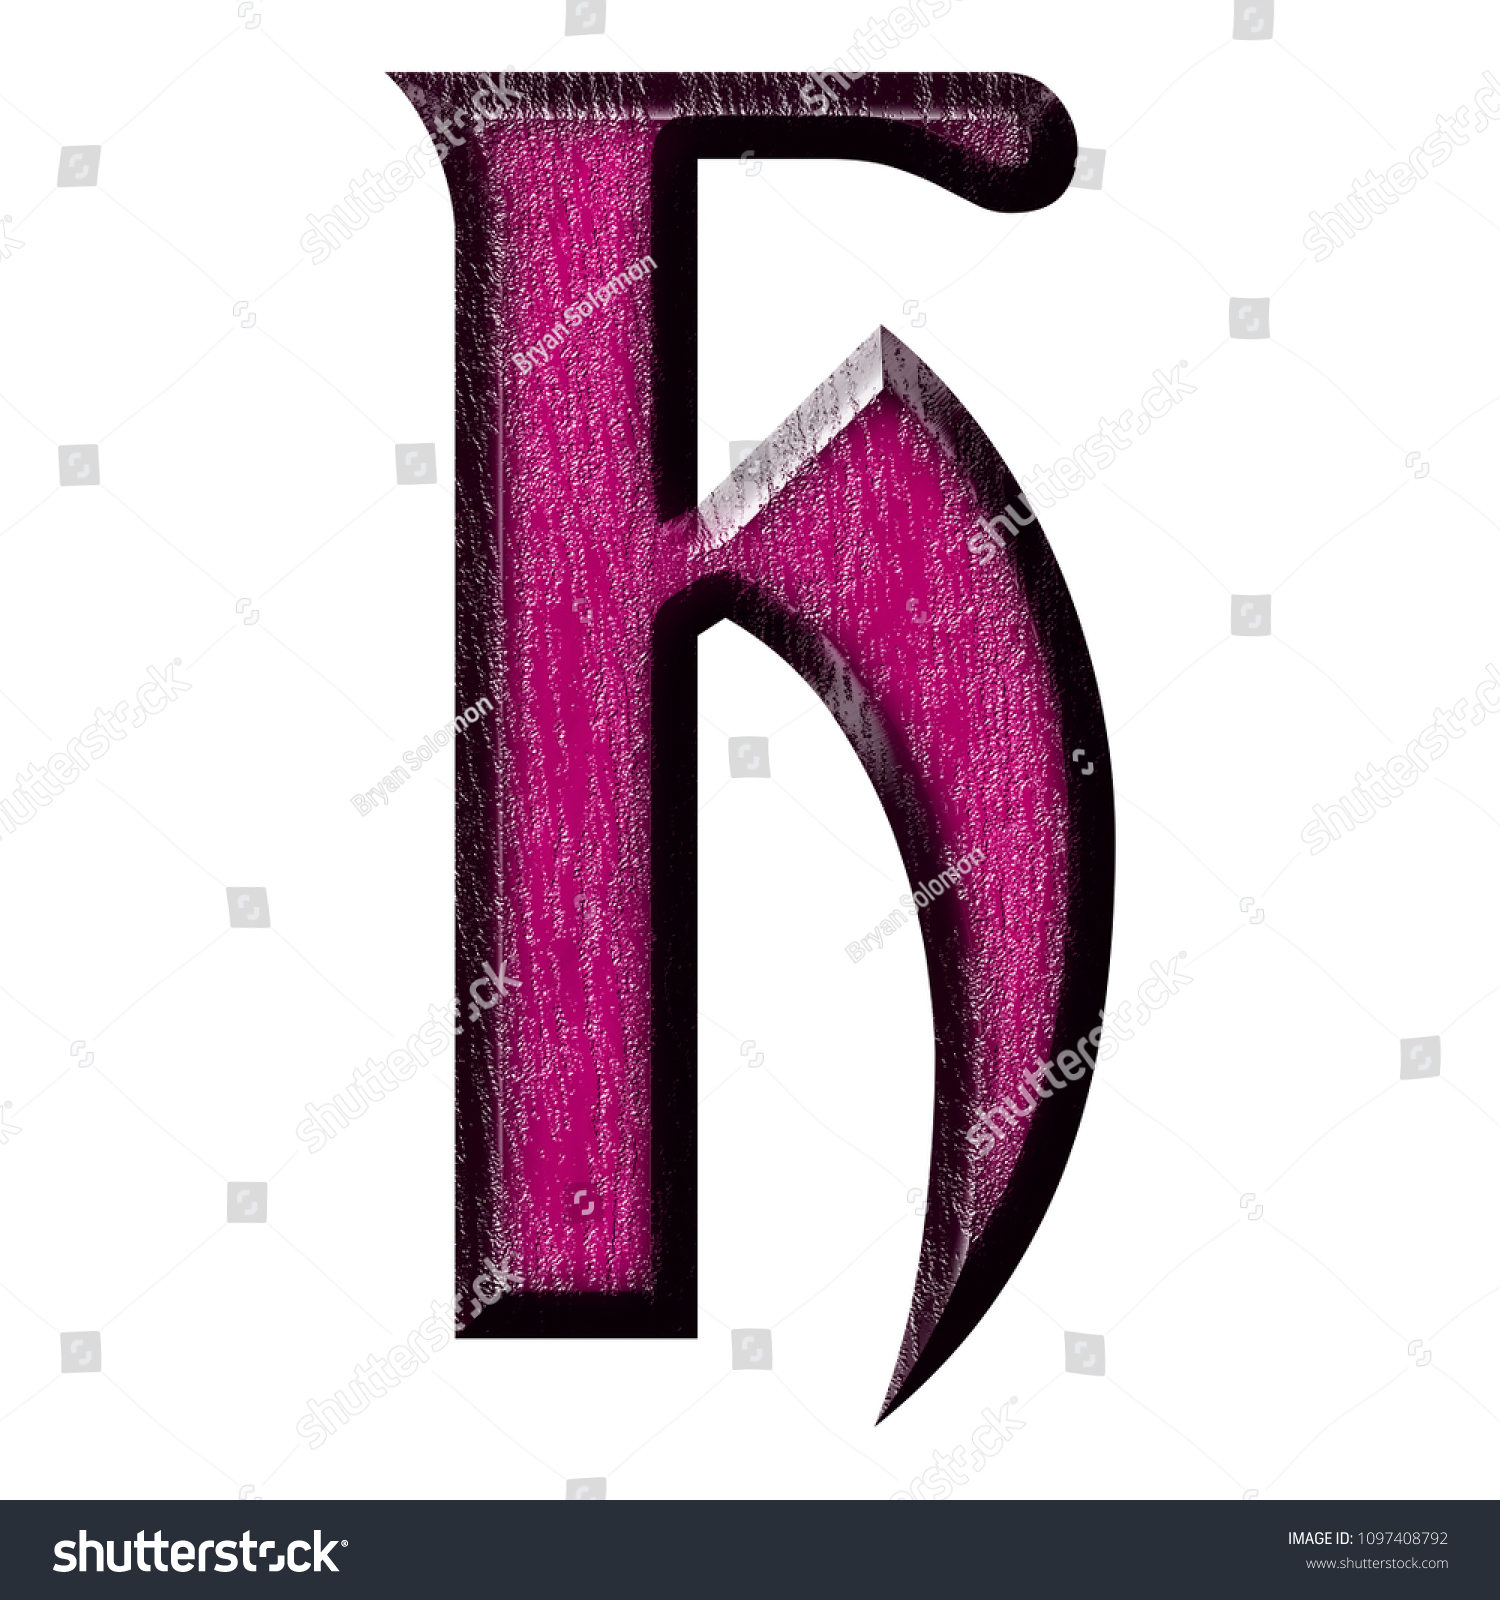 Pink painted wood letter H in a 3D illustration with a dark pink color beveled wooden textured style with a gradient edge in a royal ancient font on white with clipping path #1097408792